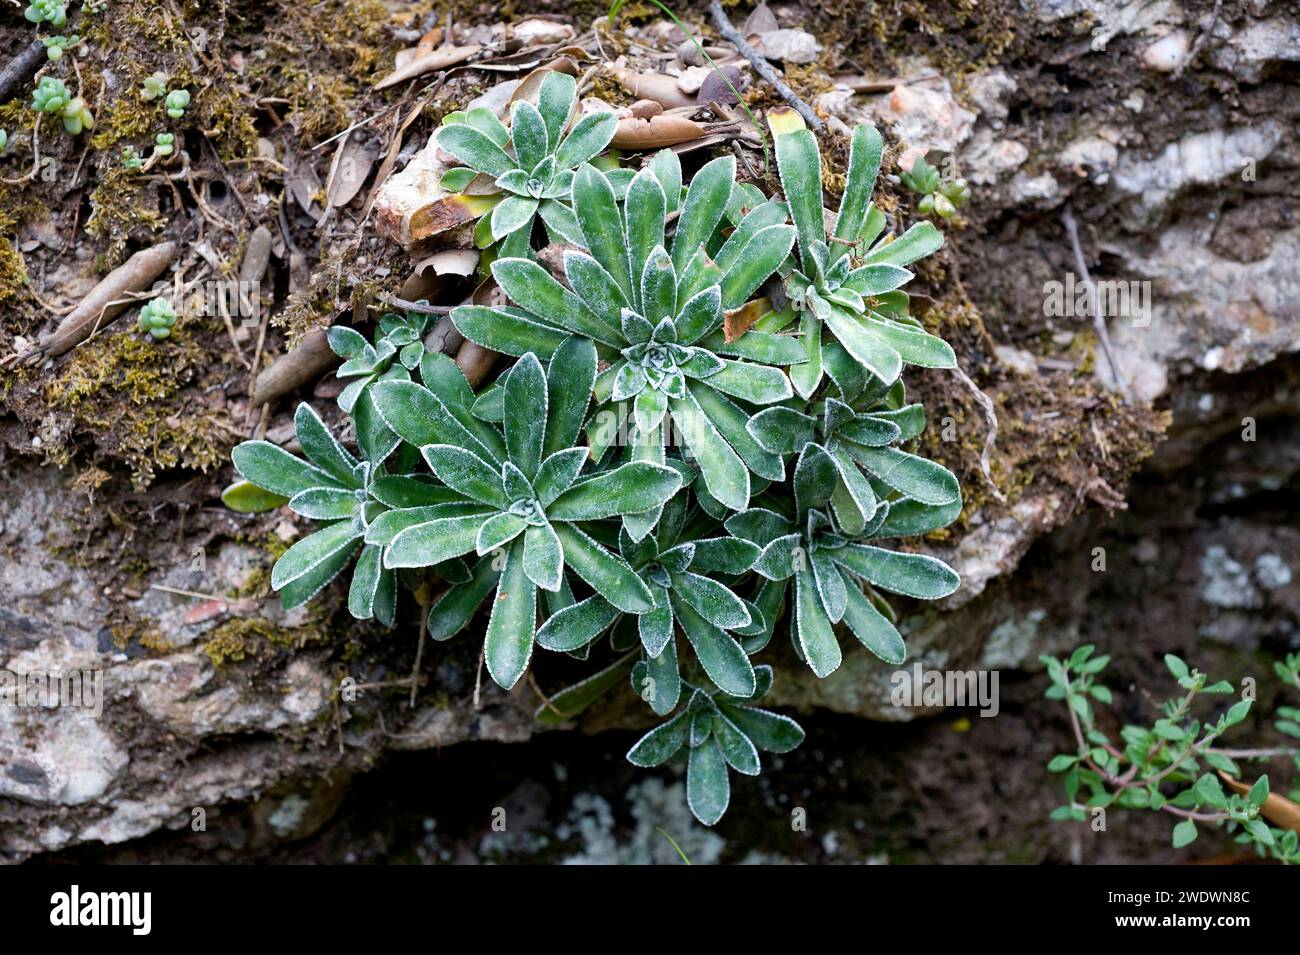 Limestone saxifrage (Saxifraga callosa) is a perennial herb native to some mountains of Catalonia (Spain), south France and Italy. The copy of the pho Stock Photo